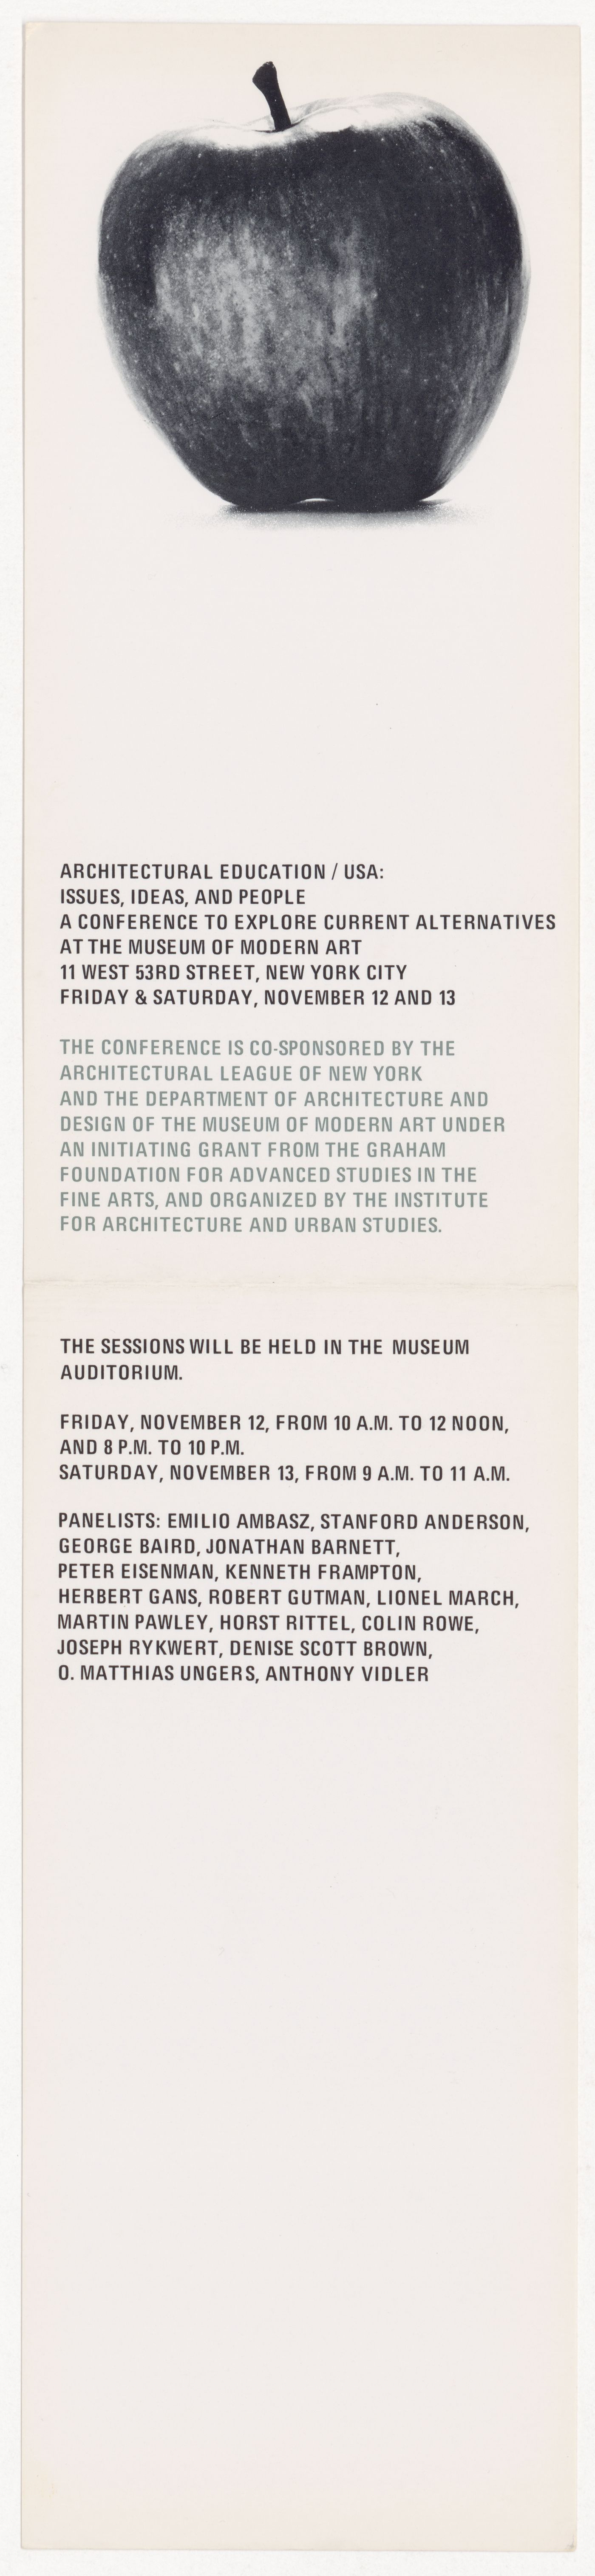 Invitation card for Conference on Architectural Education U.S.A.